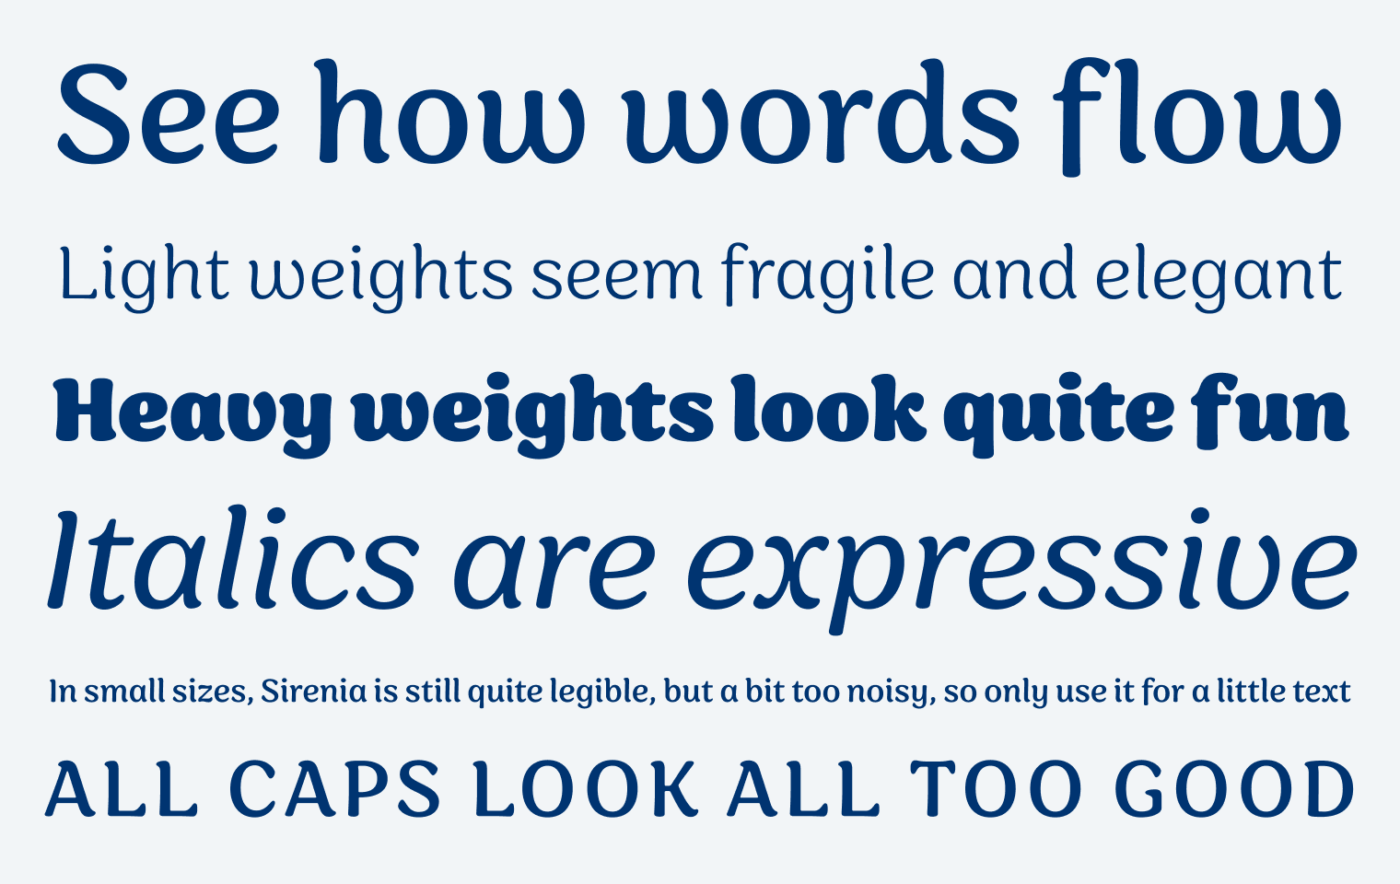 See how words flow
Light weights seem fragile and elegant
Heavy weights look quite fun
Italics are expressive
In small sizes, Sirenia is still quite legible, but a bit too noisy, so only use it for a little text All Caps look all too good.